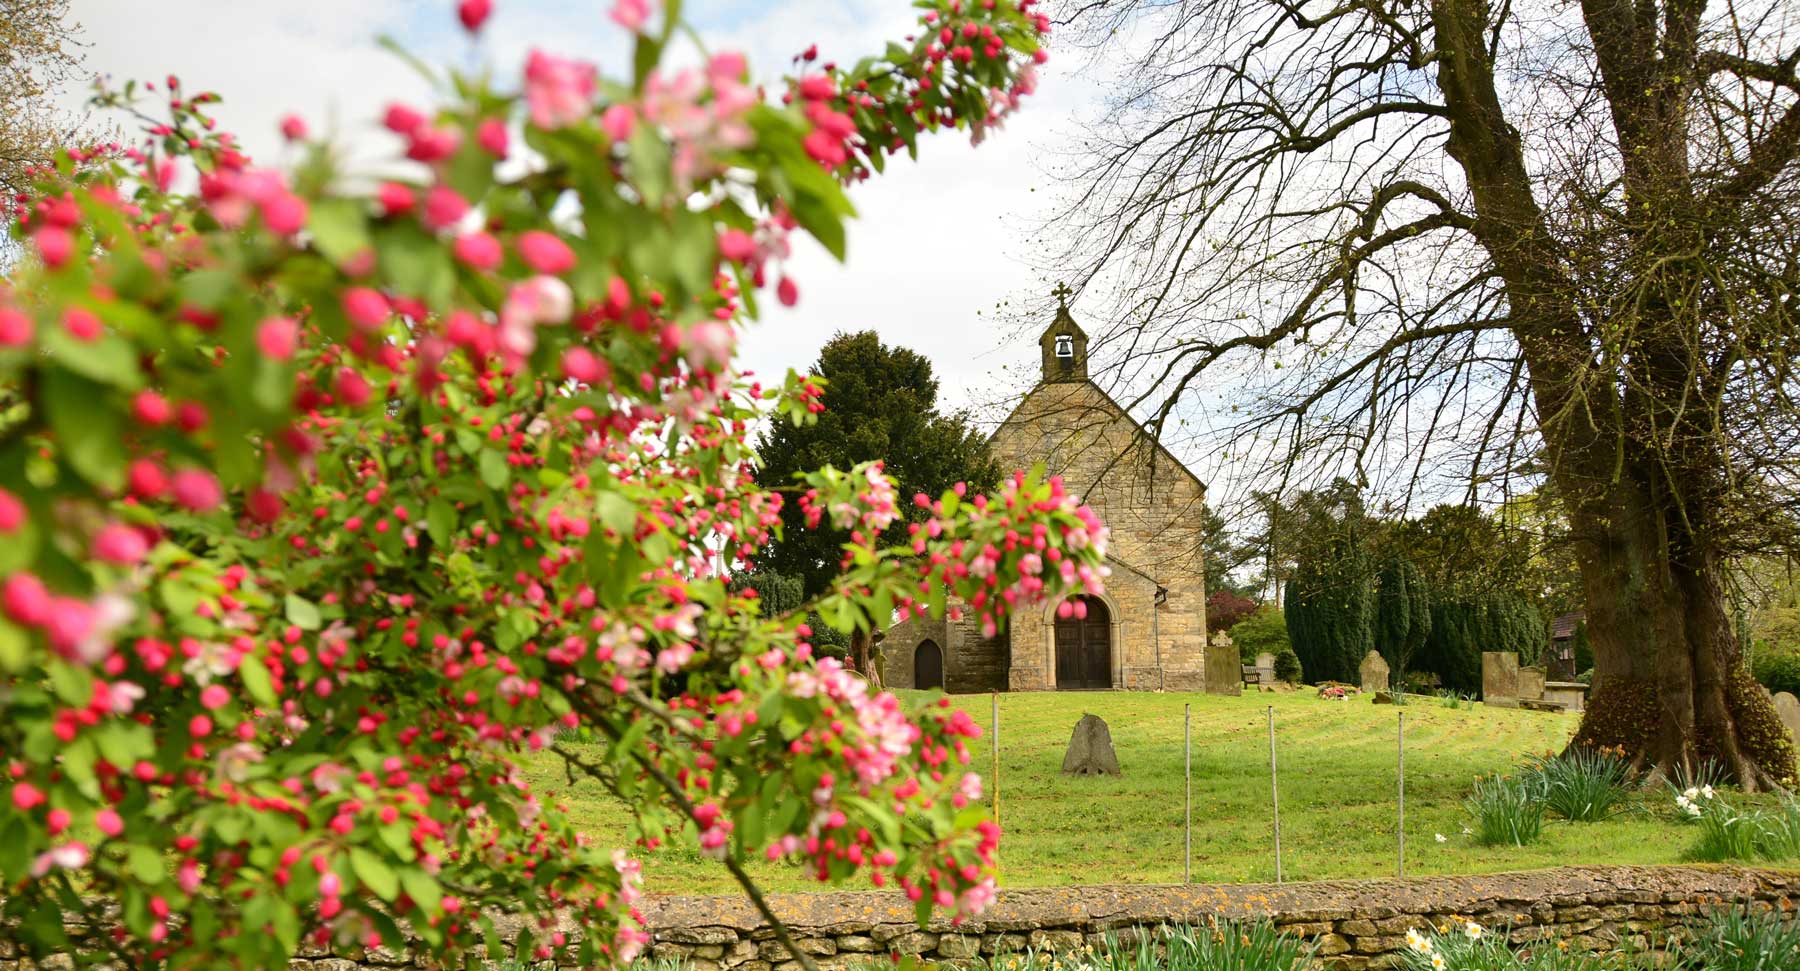 Church in a green field and flowers in foreground